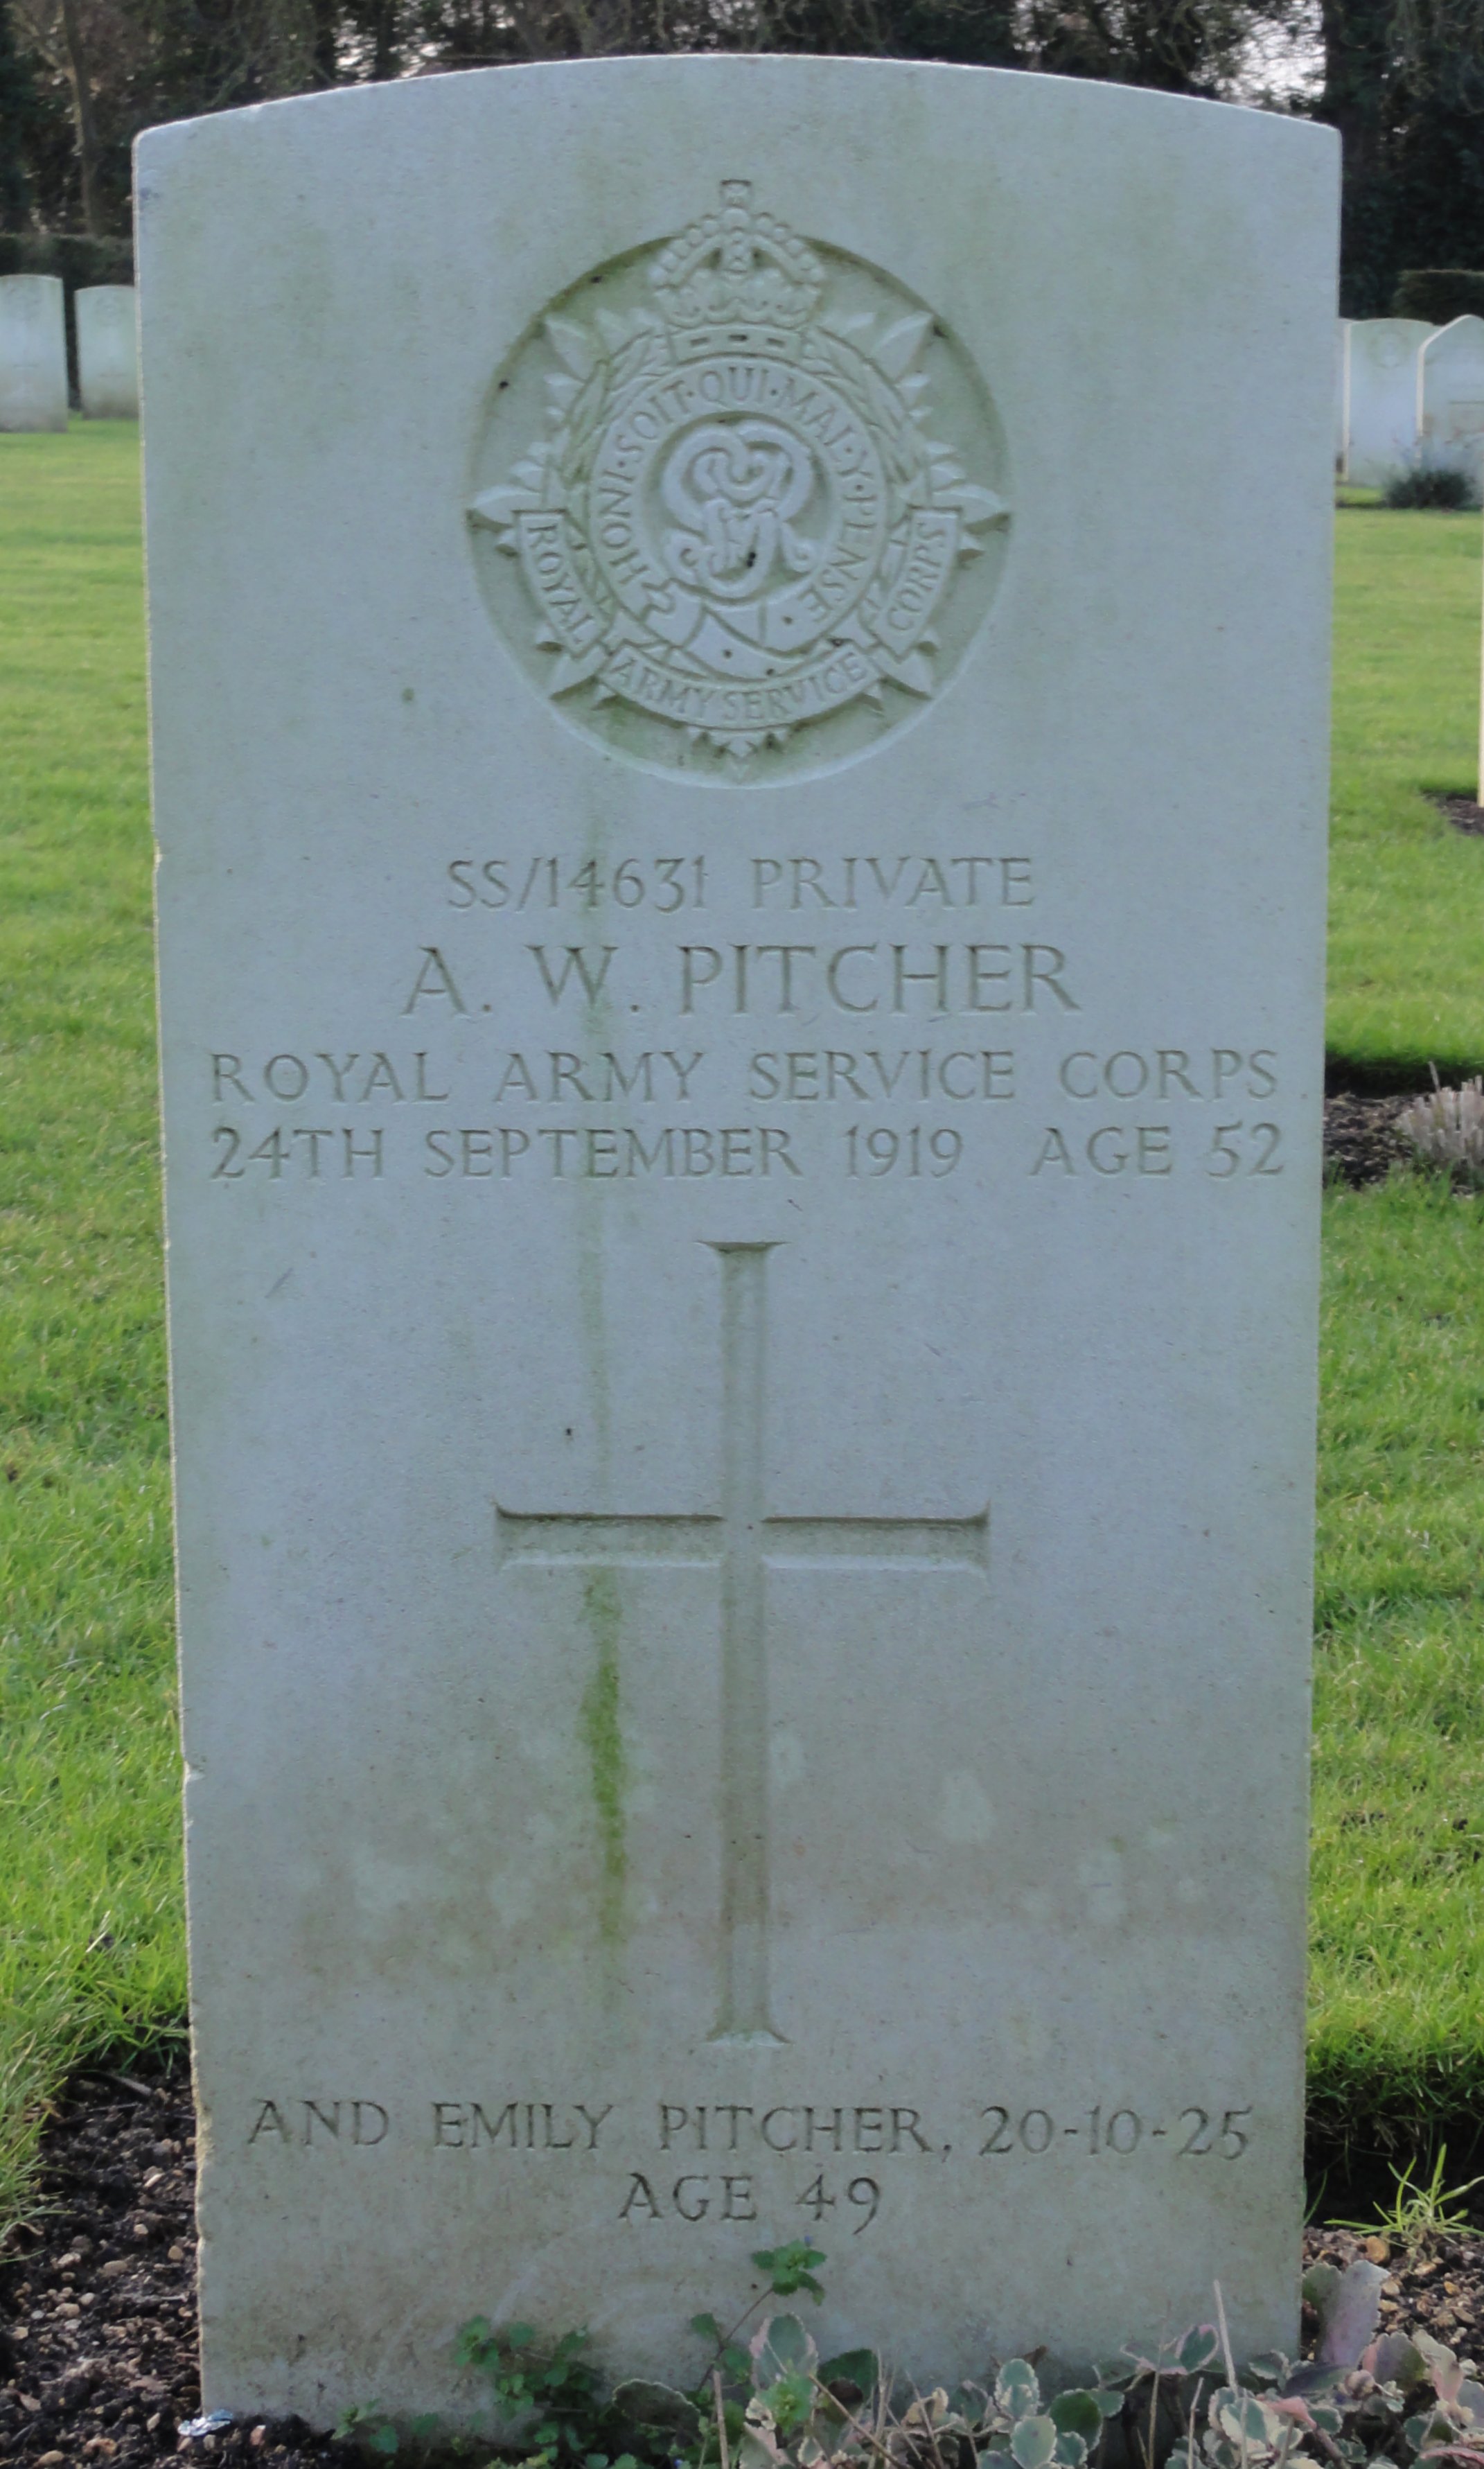 [Pitcher headstone Botley Adrian Colbrook]